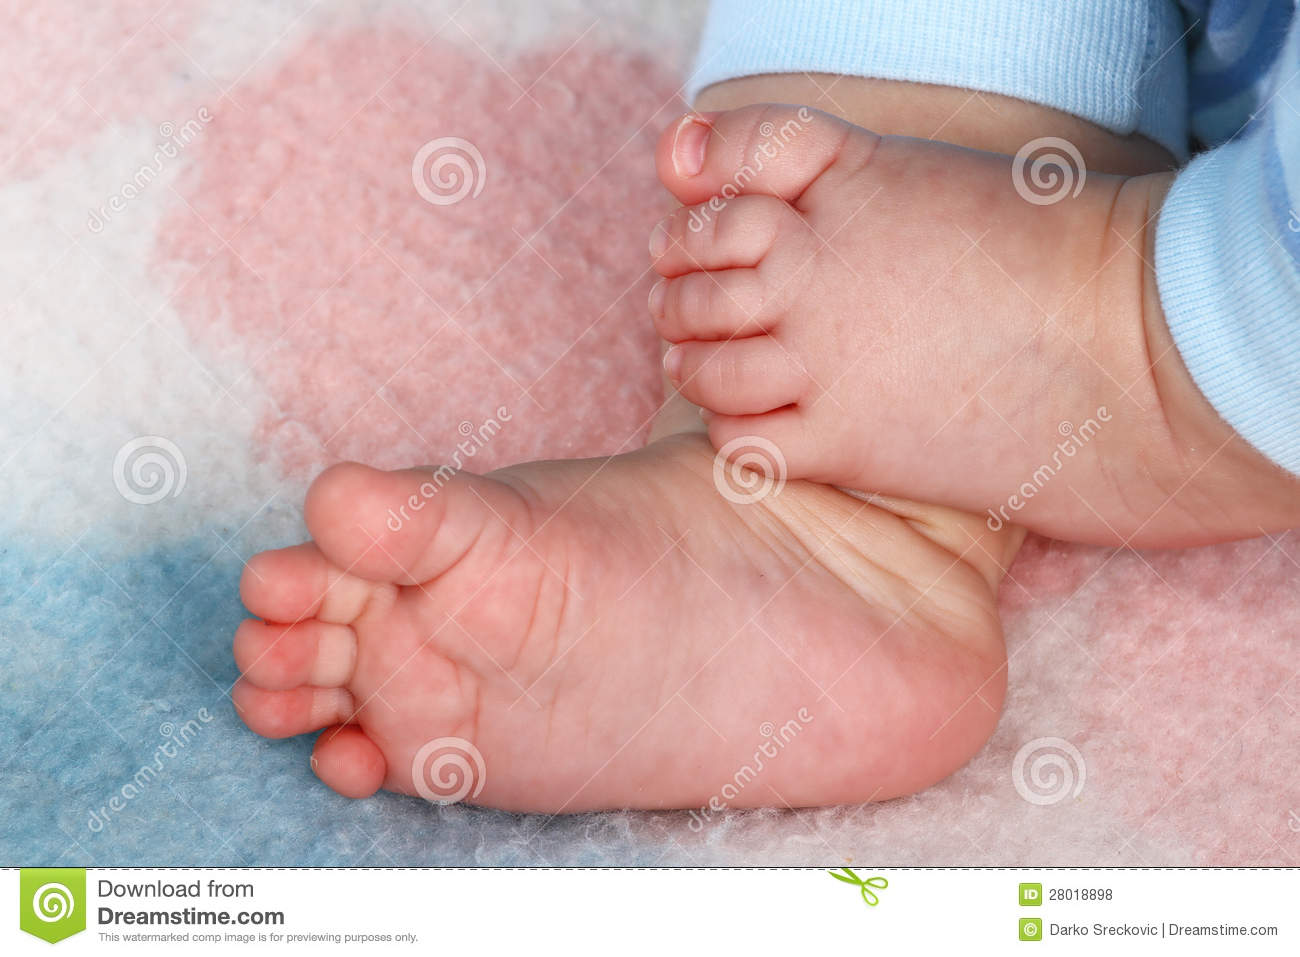 Baby Toes Royalty Free Stock Photos   Image  28018898